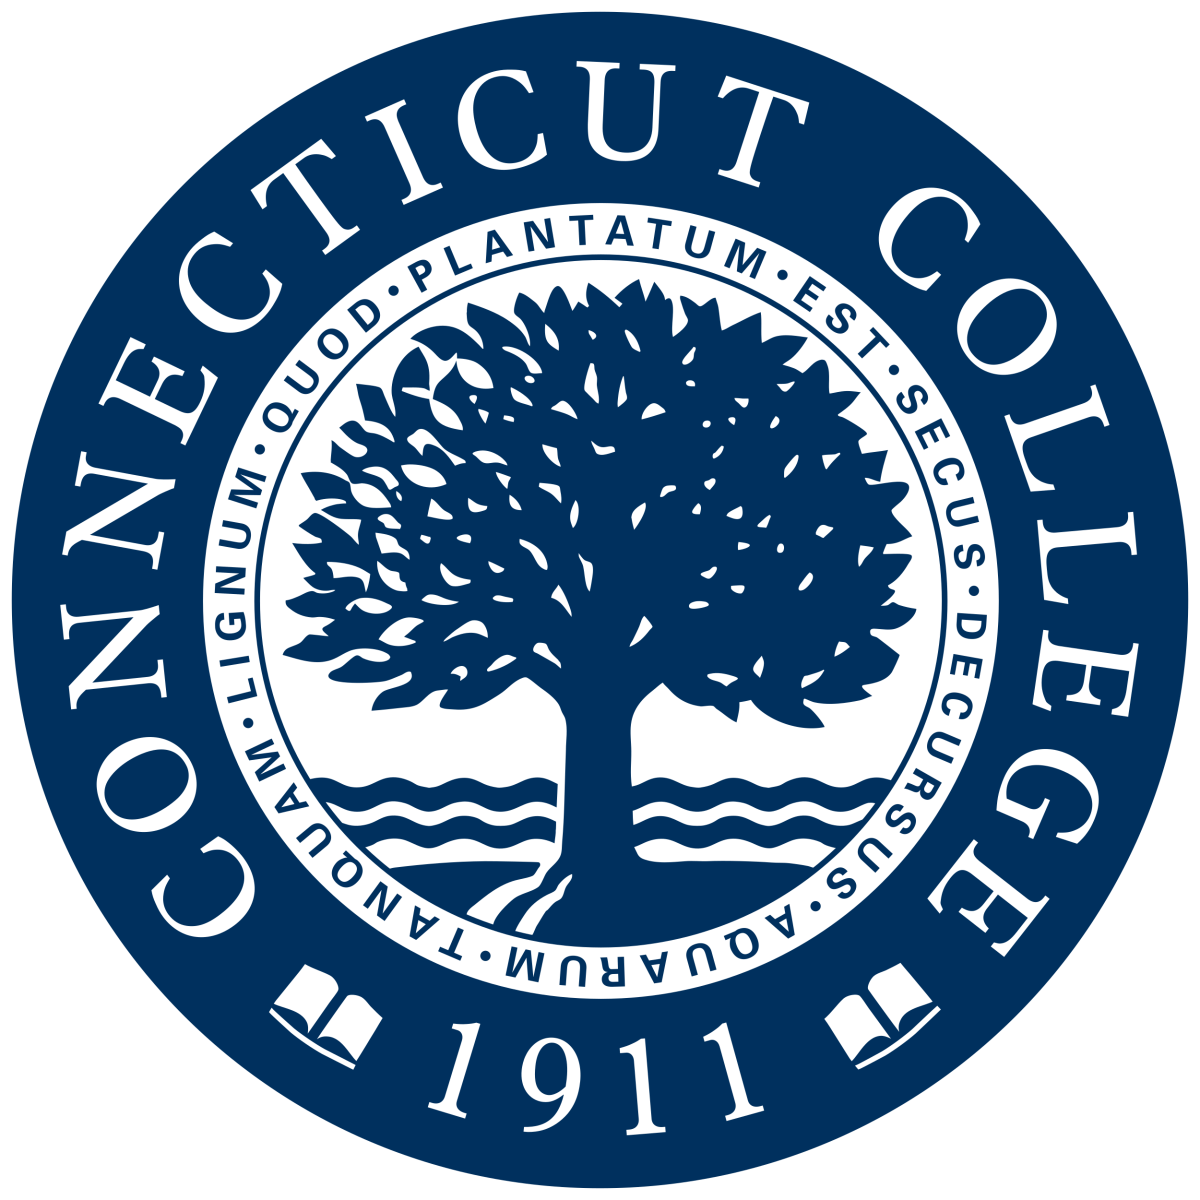 Formal_Seal_of_Connecticut_College,_New_London,_CT,_USA.svg